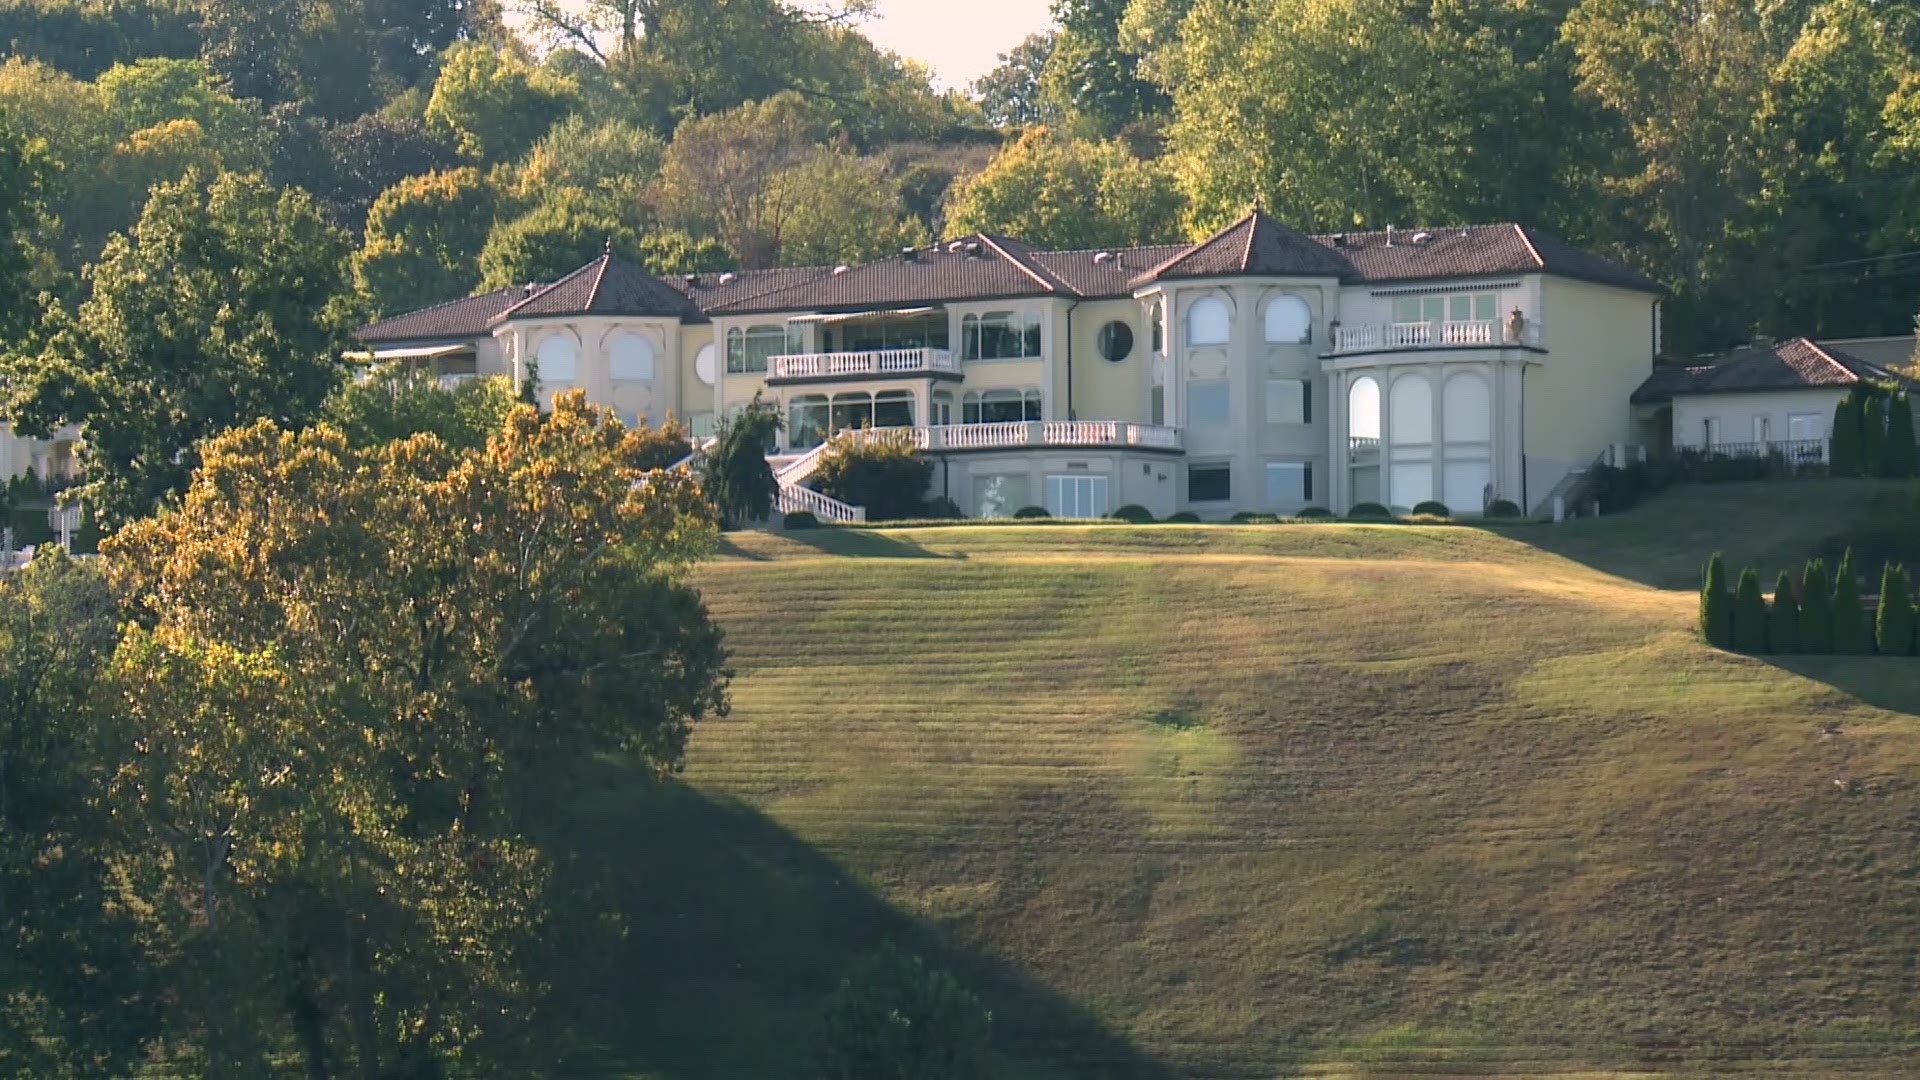 Oct. 11, 2016: The largest house in Tennessee is for sale in Knoxville for a listed price of $13.8 million, but will be sold at auction with no limit and no reserve on October 26.